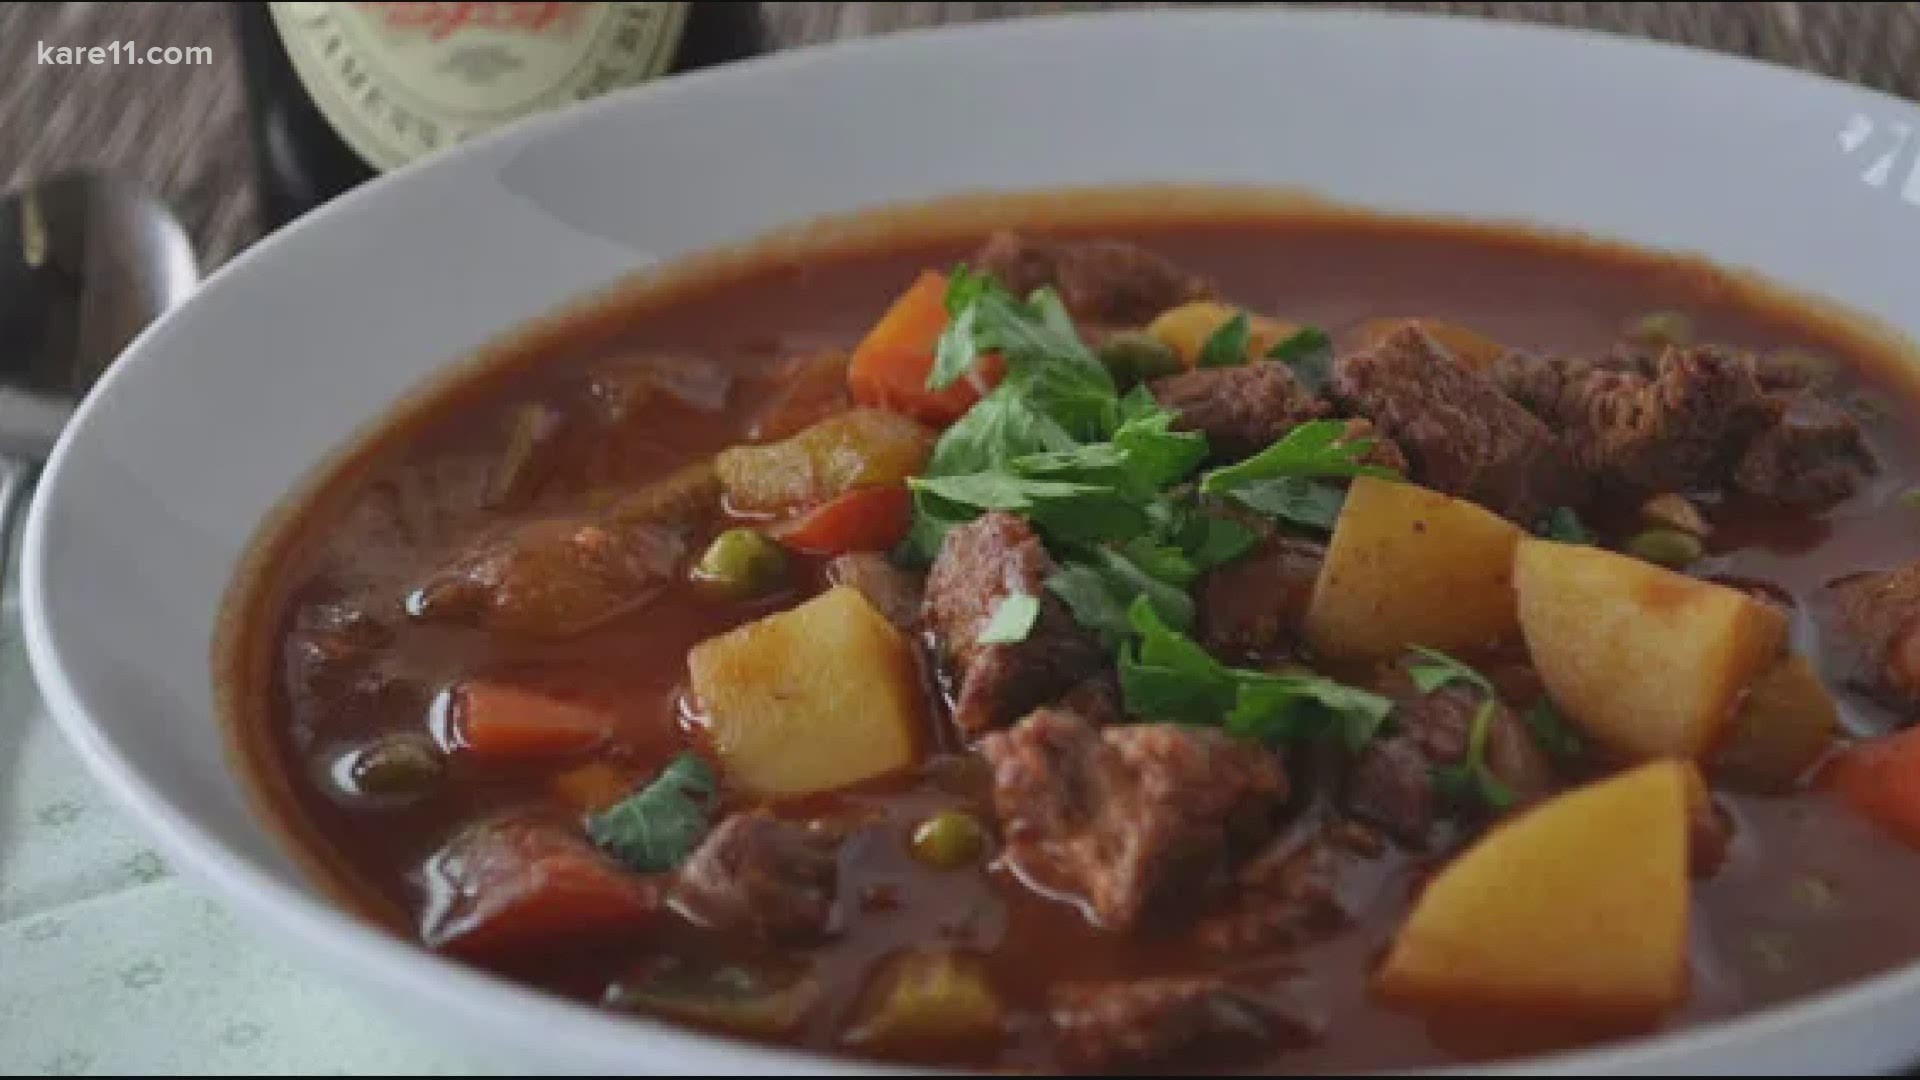 John Cosgrove, who grew up in Ireland, spoke with KARE 11 about the history of Irish cuisine and some St. Patrick's Day traditions in Ireland.